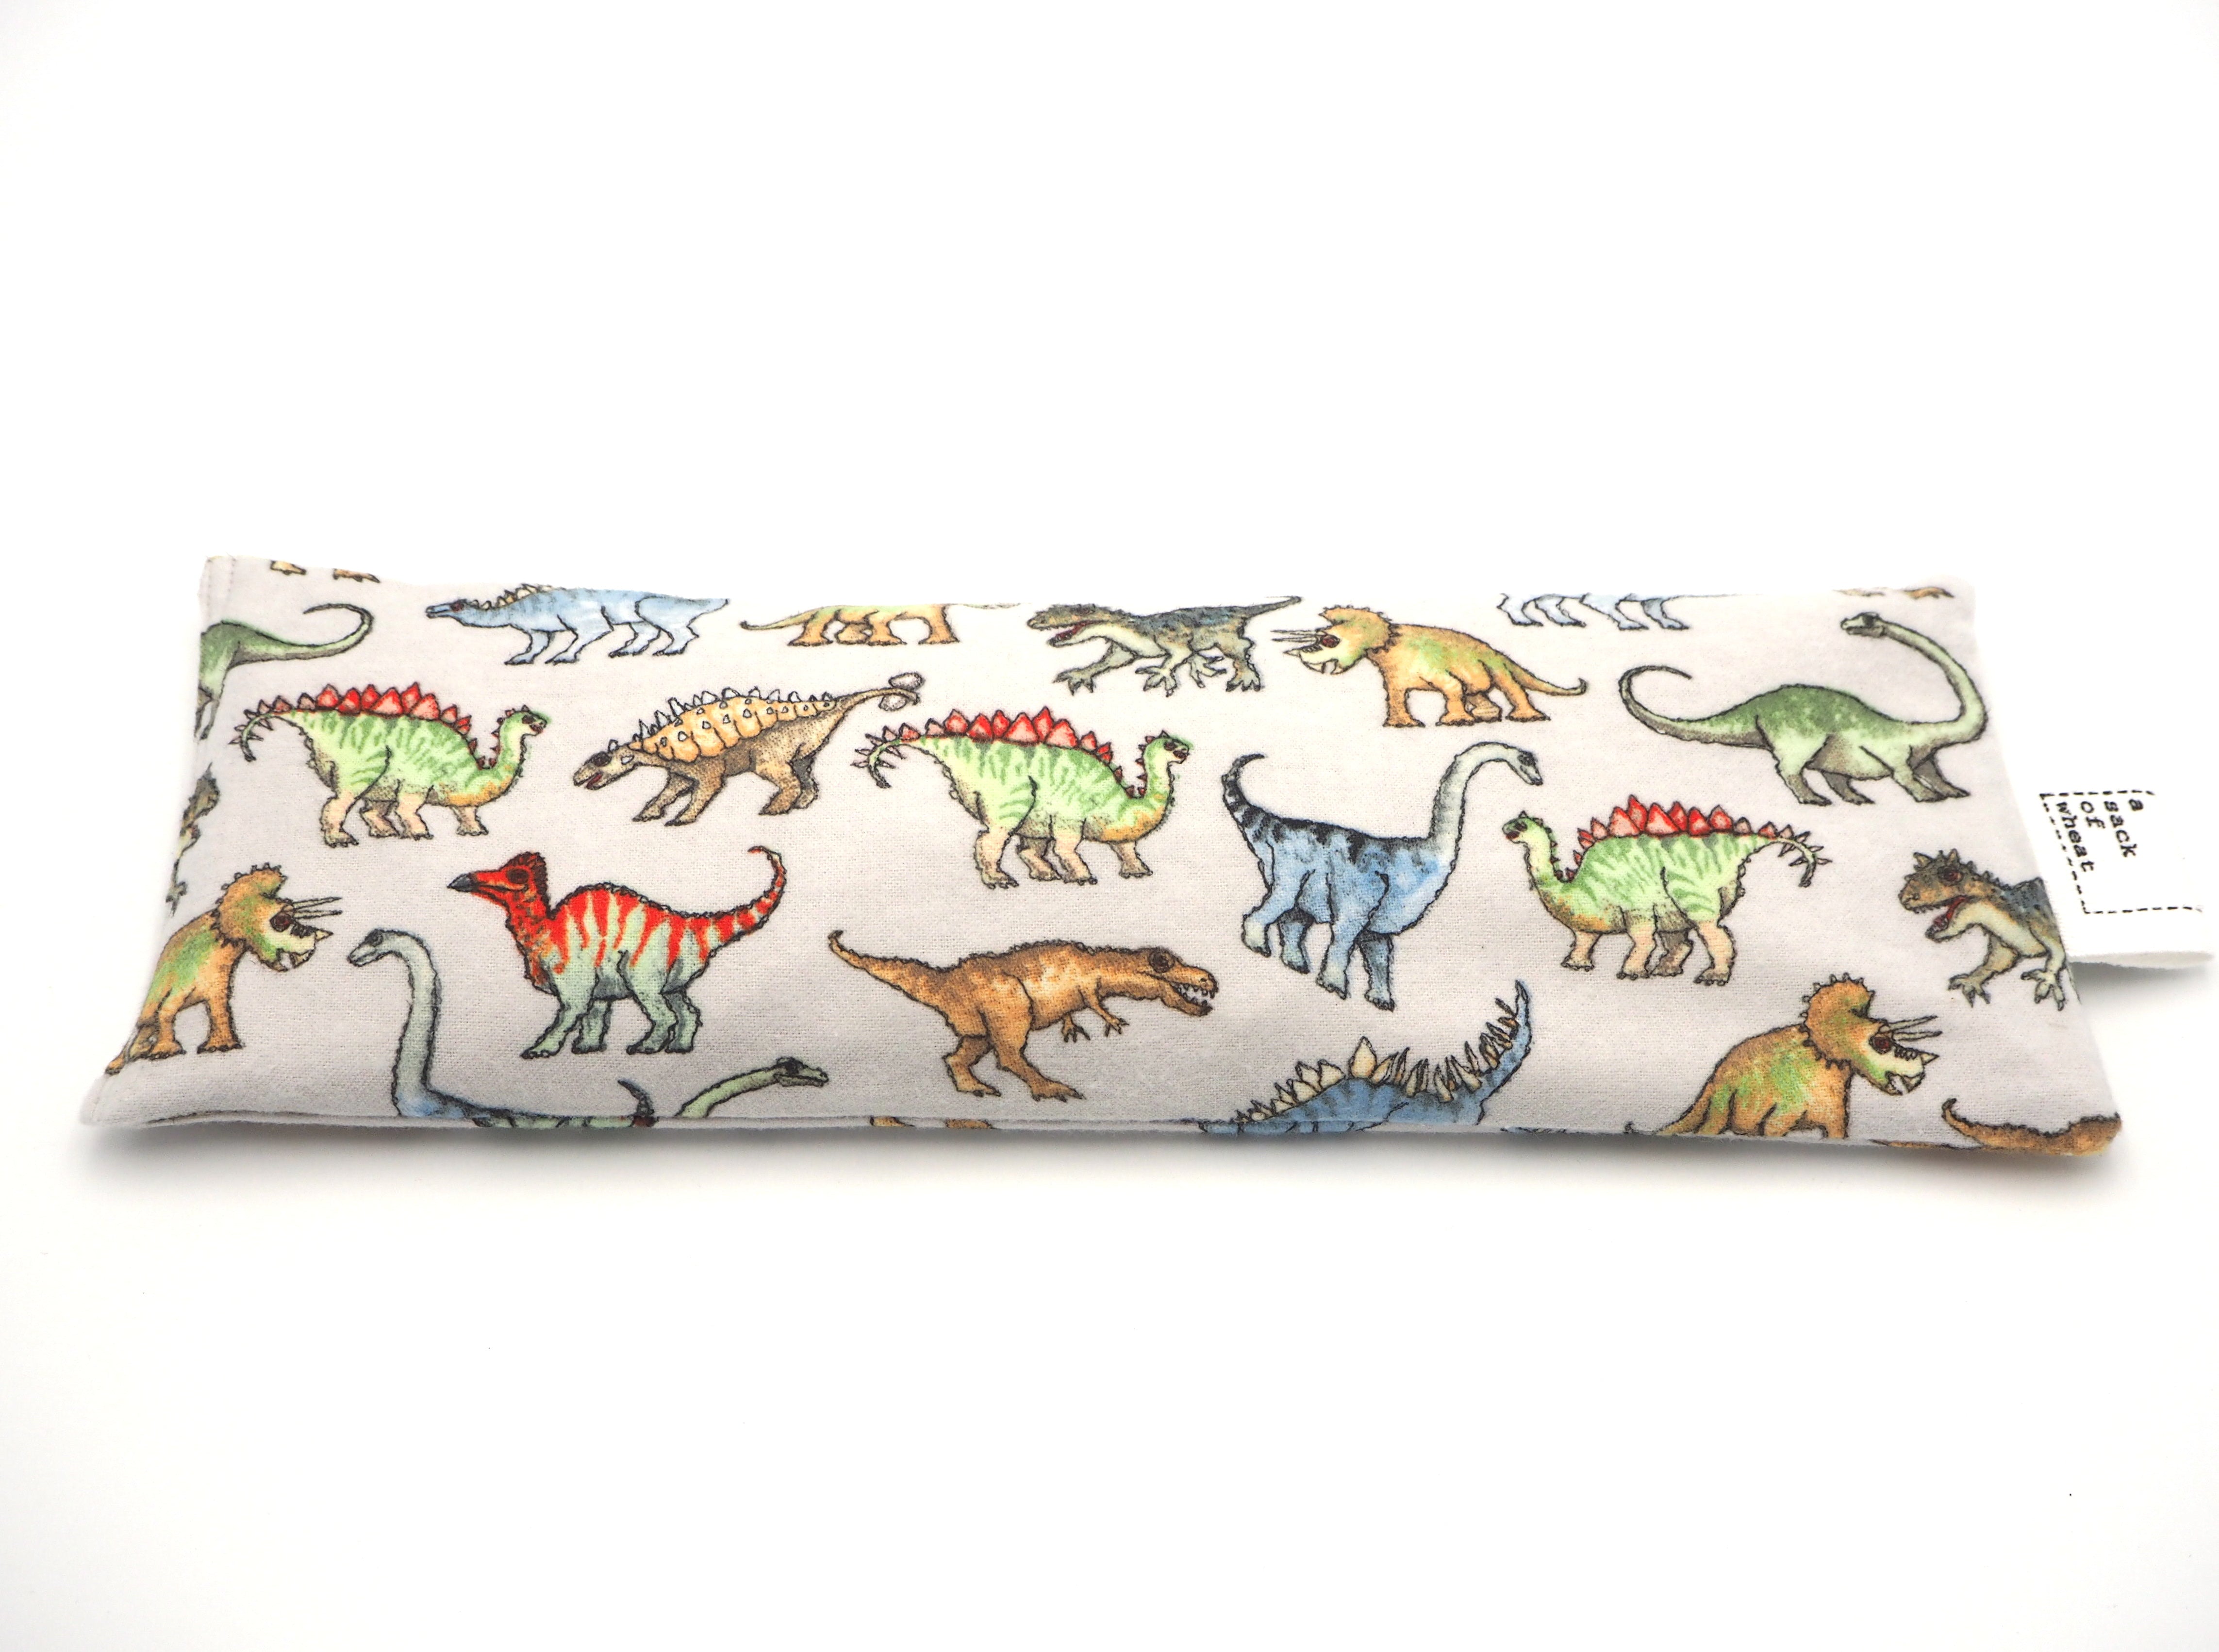 Flat view of A Sack Of Wheat, featuring colourful dinosaurs on flannelette, 100% cotton fabric